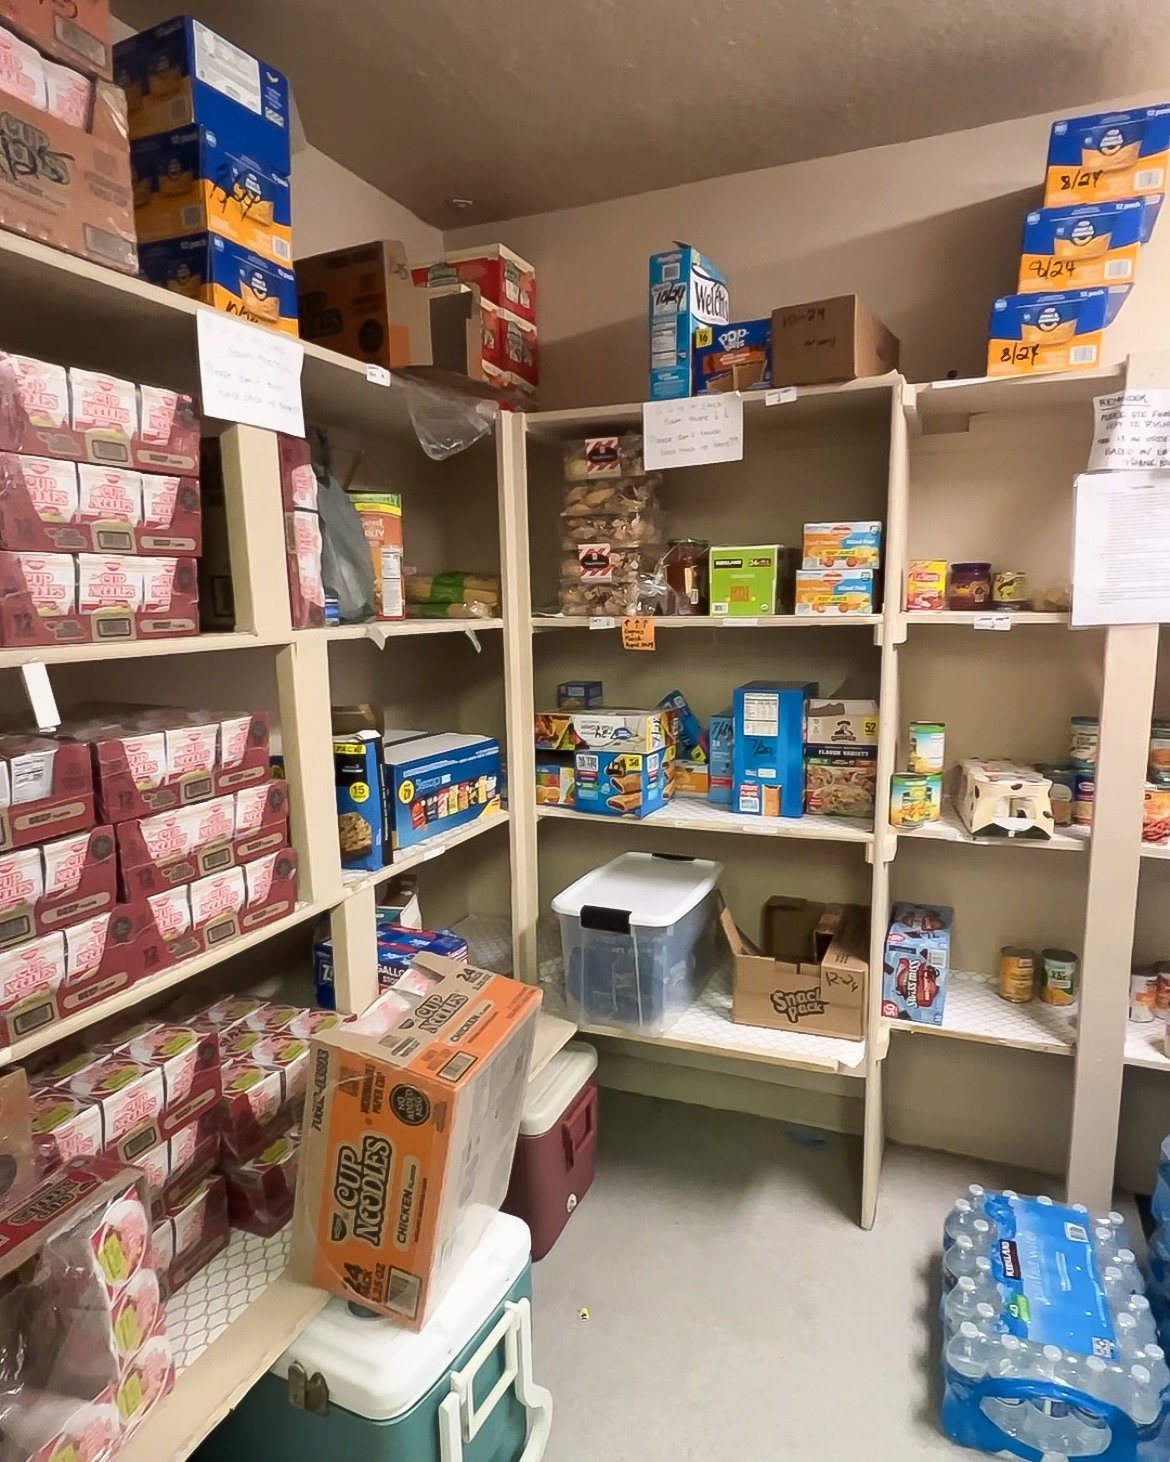 Let's streamline our food drives! We've made it easy by creating an Amazon registry with all our pantry needs. With 5000 food items going out every month, 
your help is crucial. Would you consider signing up for a recurring delivery?
https://a.co/aSp